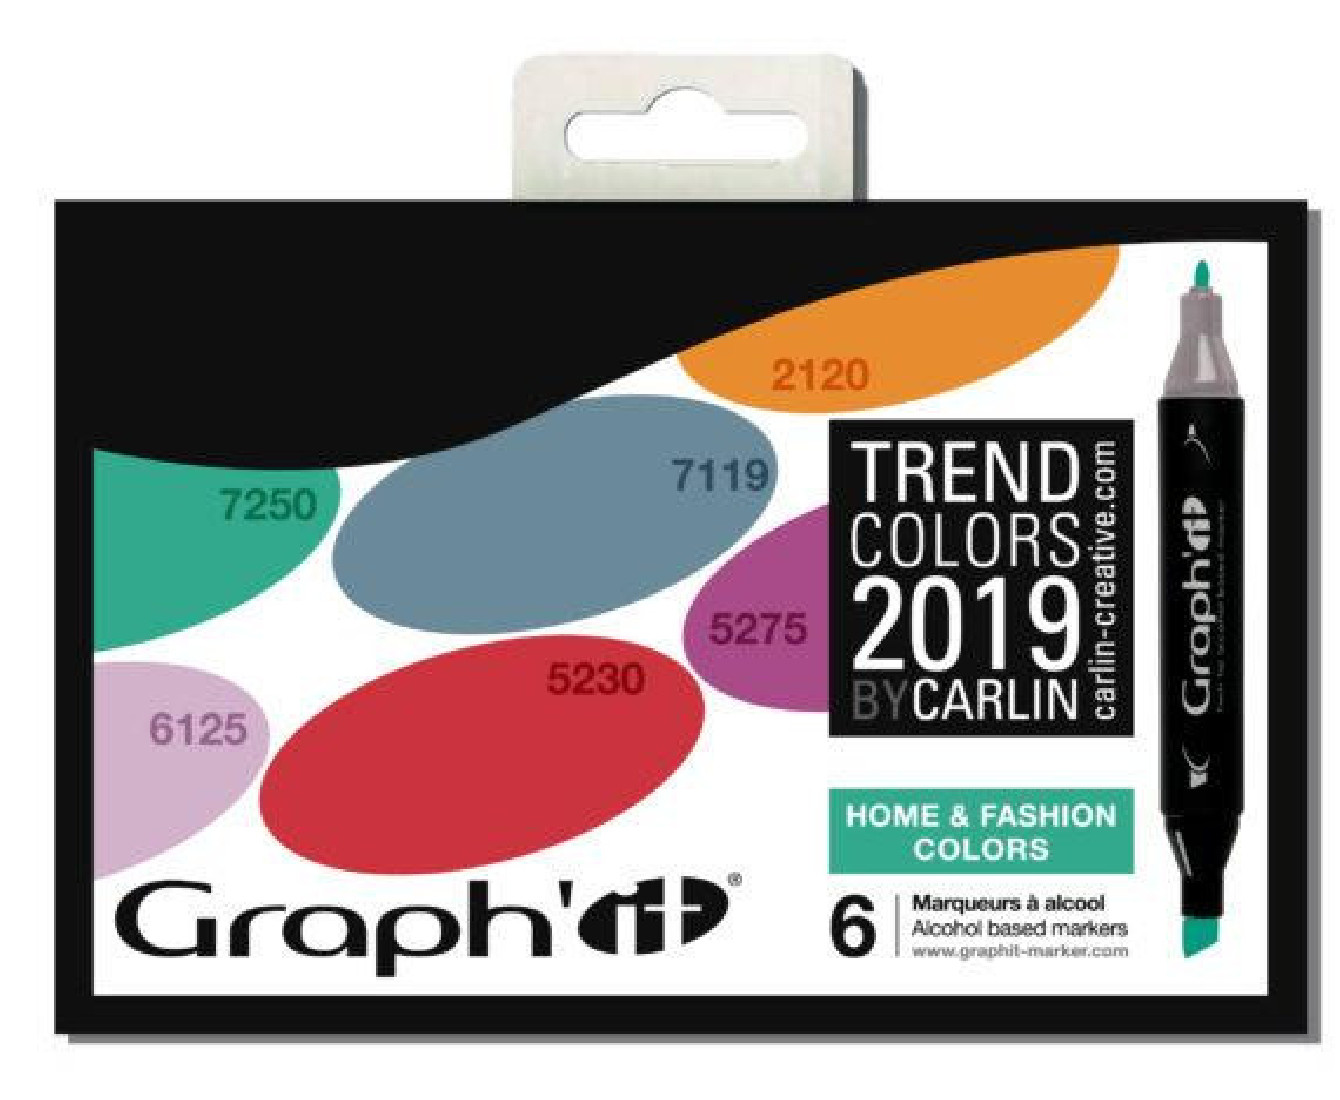 GRAPH IT HOME & FASHION COLORS 6 ALCOHOL BASED MARKERS GI00137